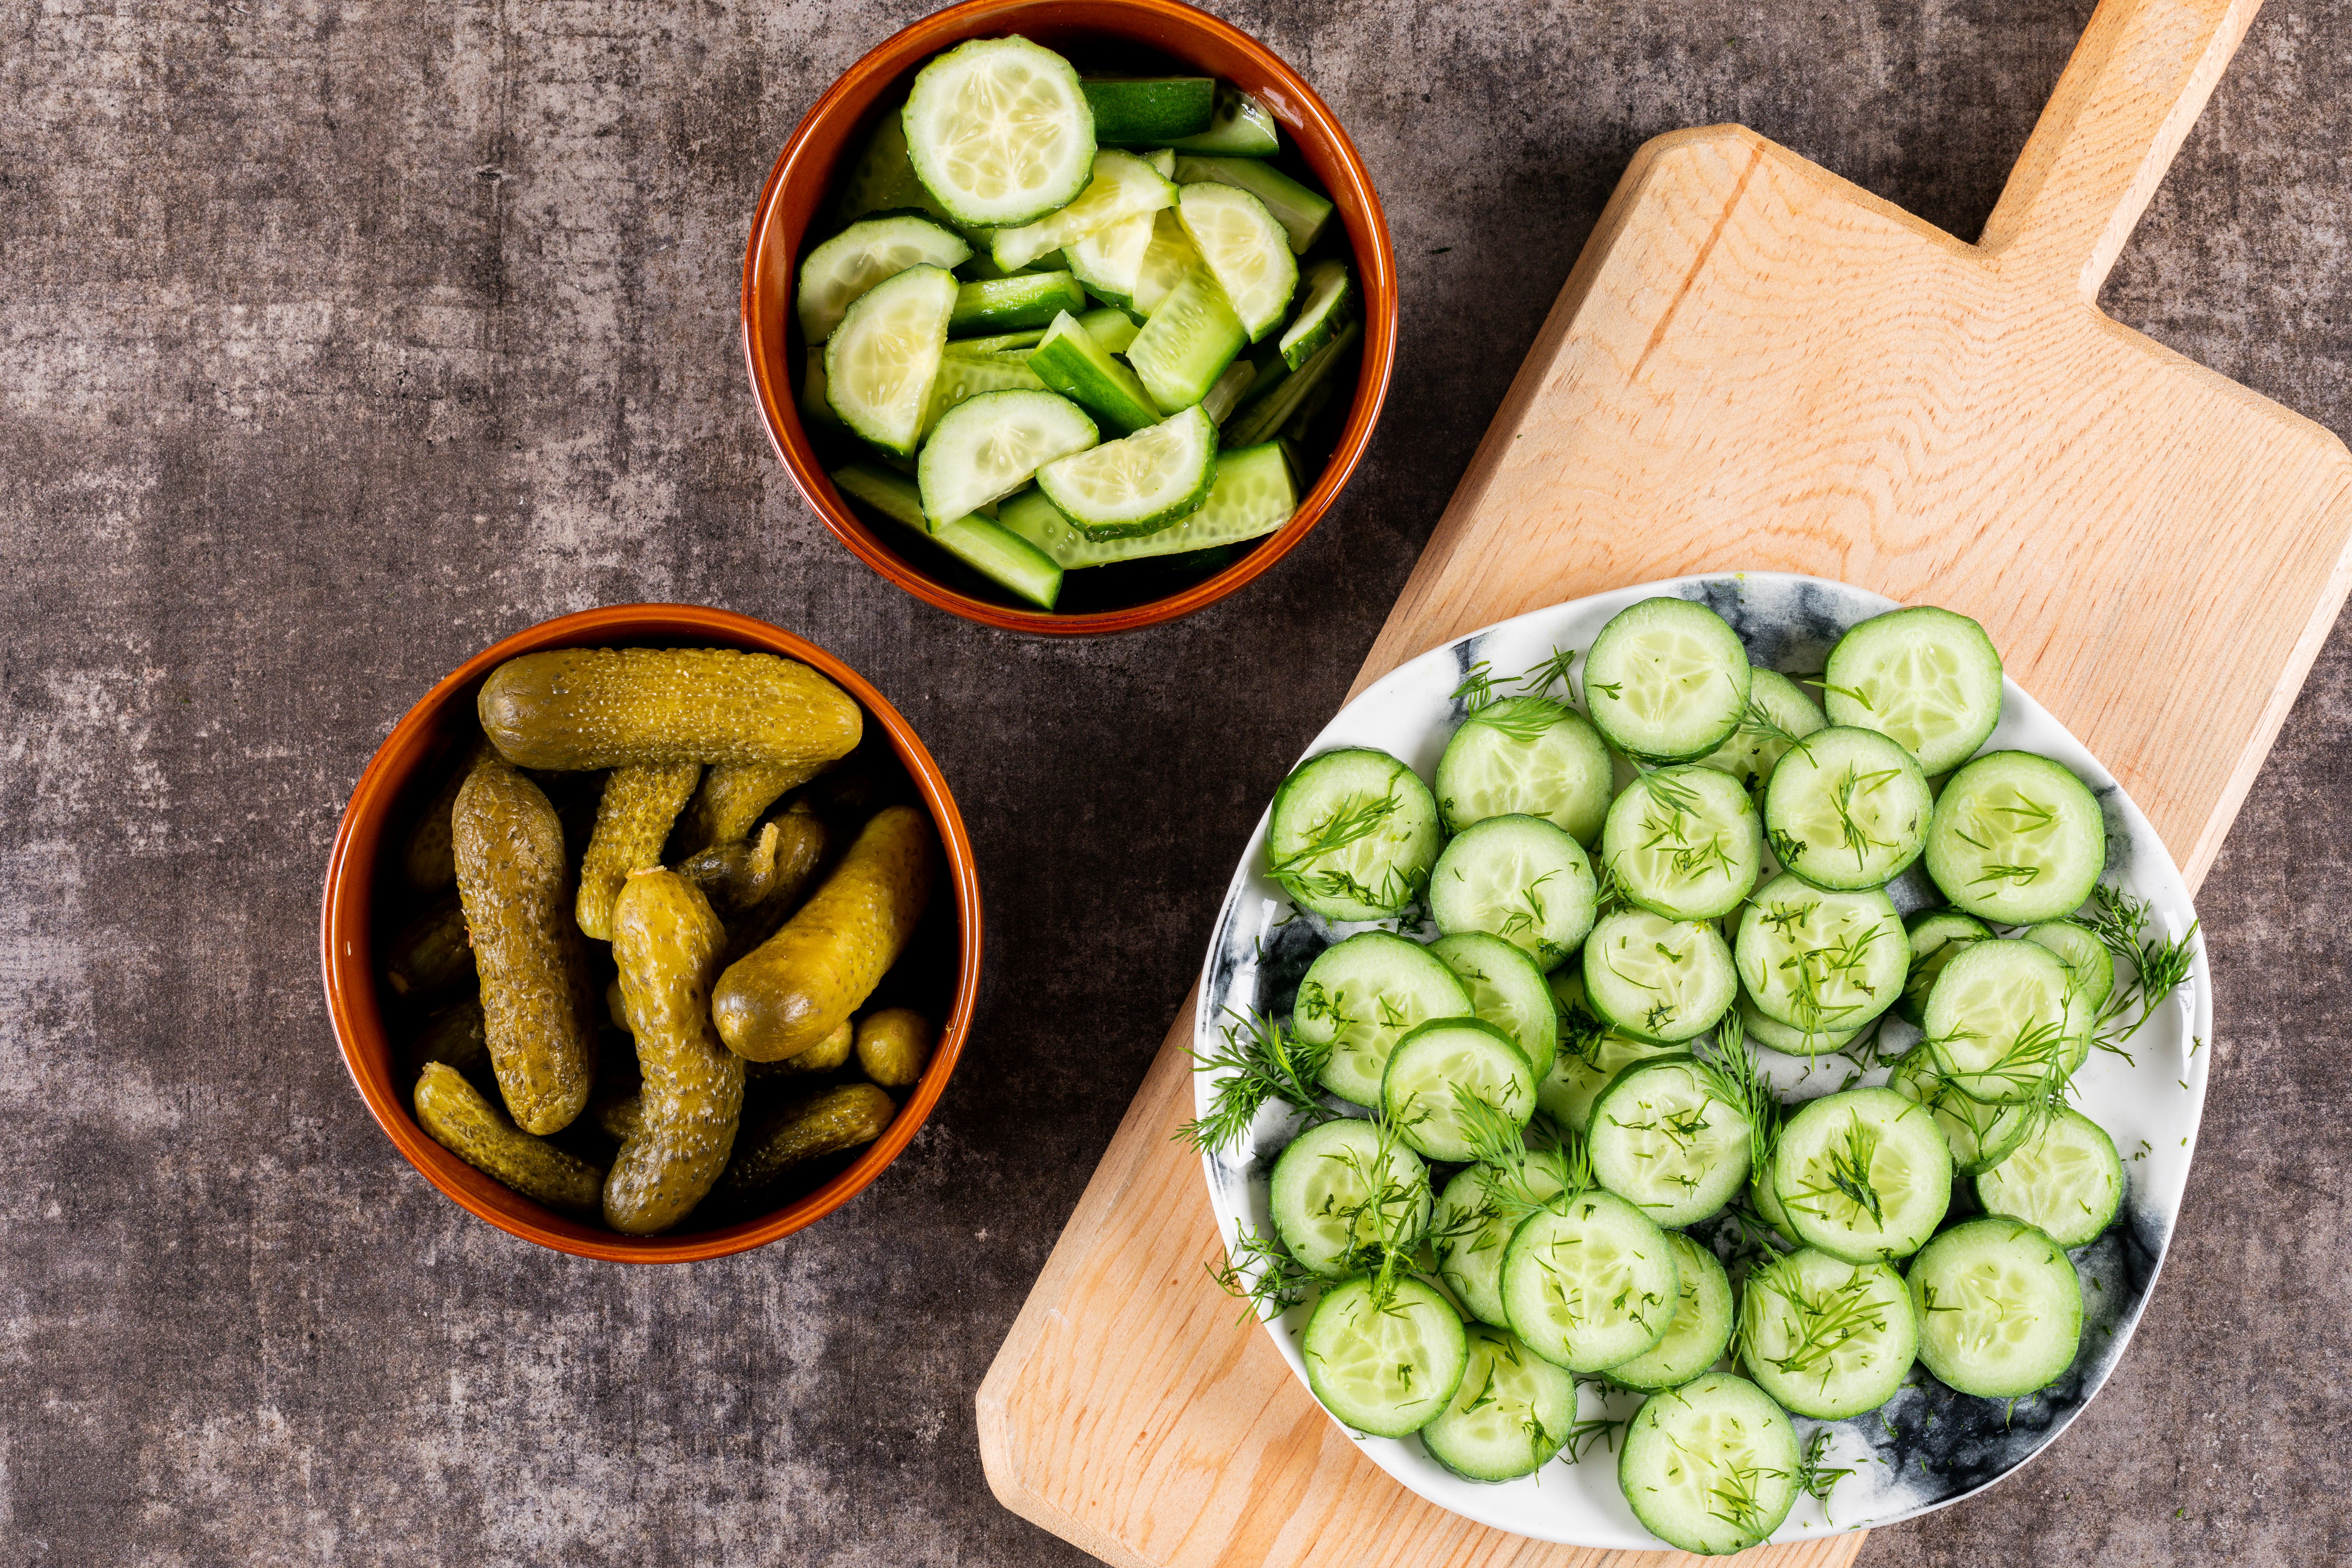 top-view-cucumber-fresh-sliced-with-dill-plate-wooden-cutting-board-pickled-bowl-brown-stone